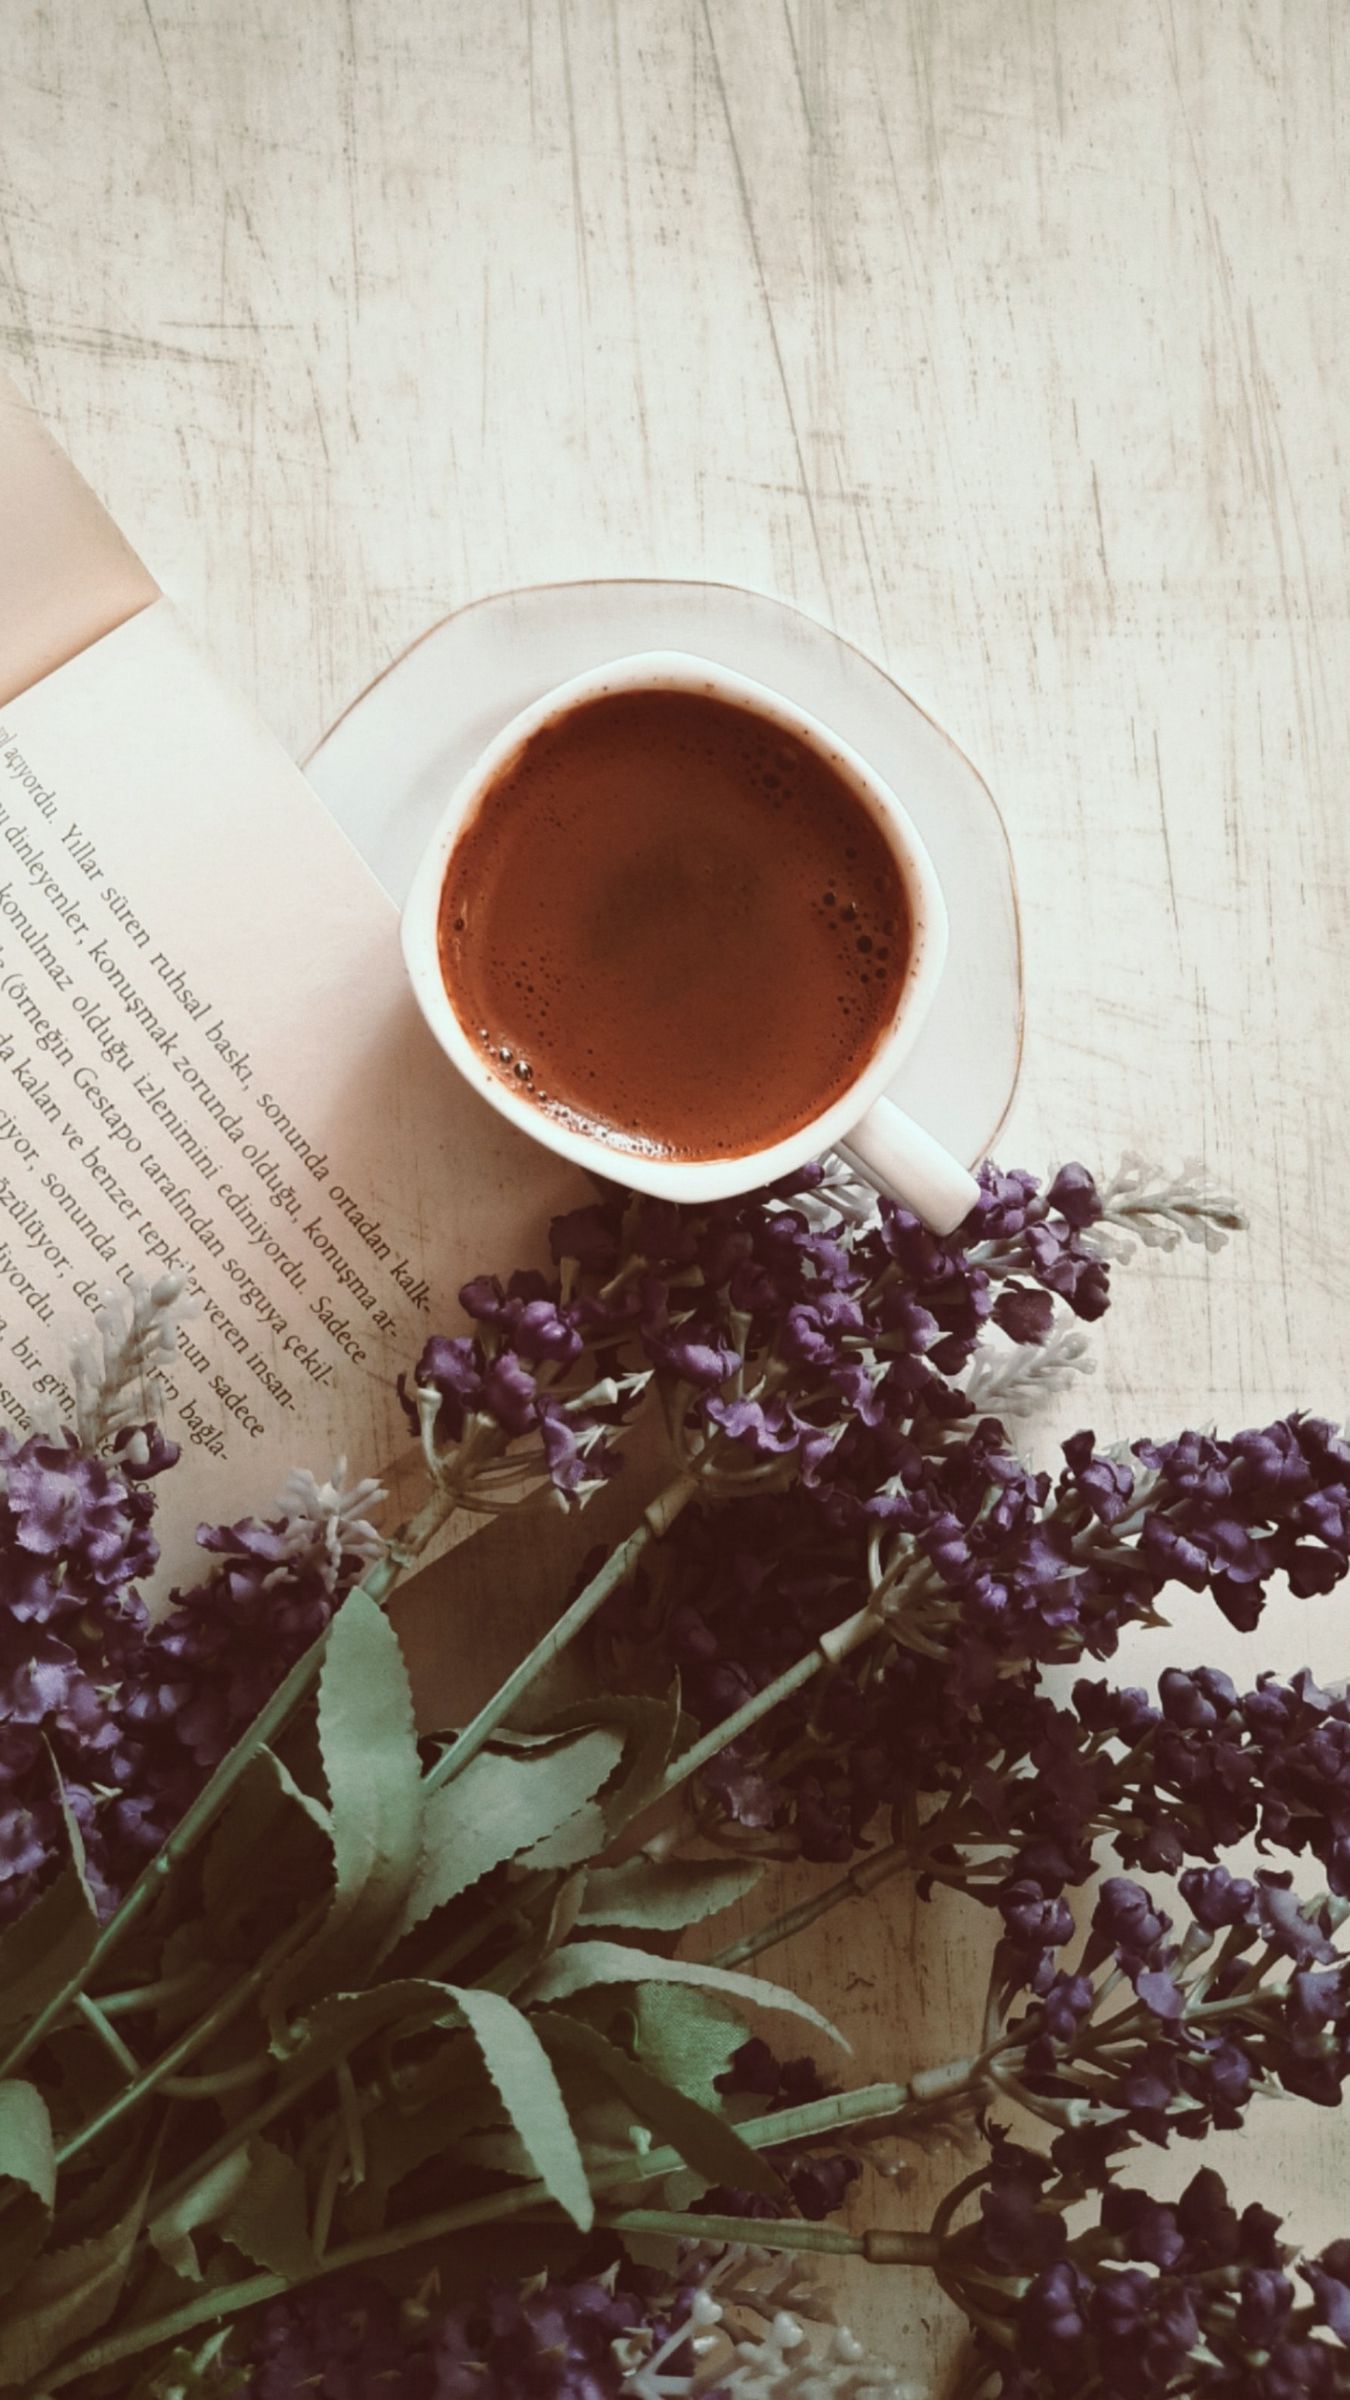 Download wallpaper 1350x2400 coffee, cup, book, flowers, text iphone  8+/7+/6s+/6+ for parallax hd background